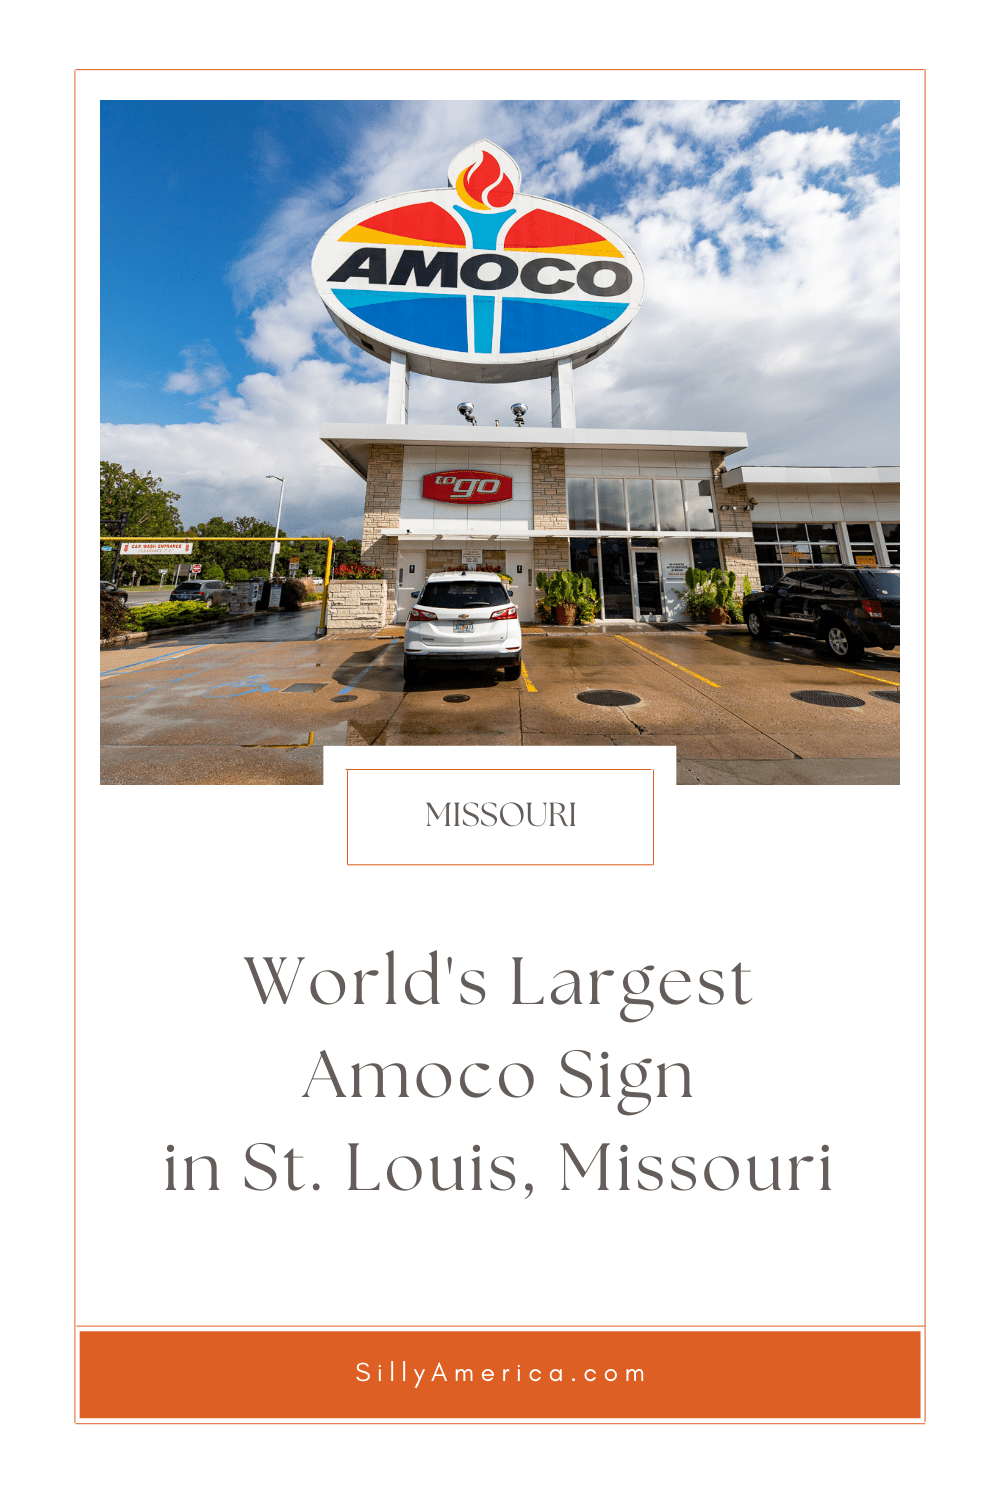 Find the World's Largest Amoco Sign at Stevenson's Hi-Pointe Amoco in St. Louis, Missouri.  #RoadTrips #RoadTripStop #Route66 #Route66RoadTrip #MissouriRoute66 #Missouri #MissouriRoadTrip #MissouriRoadsideAttractions #RoadsideAttractions #RoadsideAttraction #RoadsideAmerica #RoadTrip